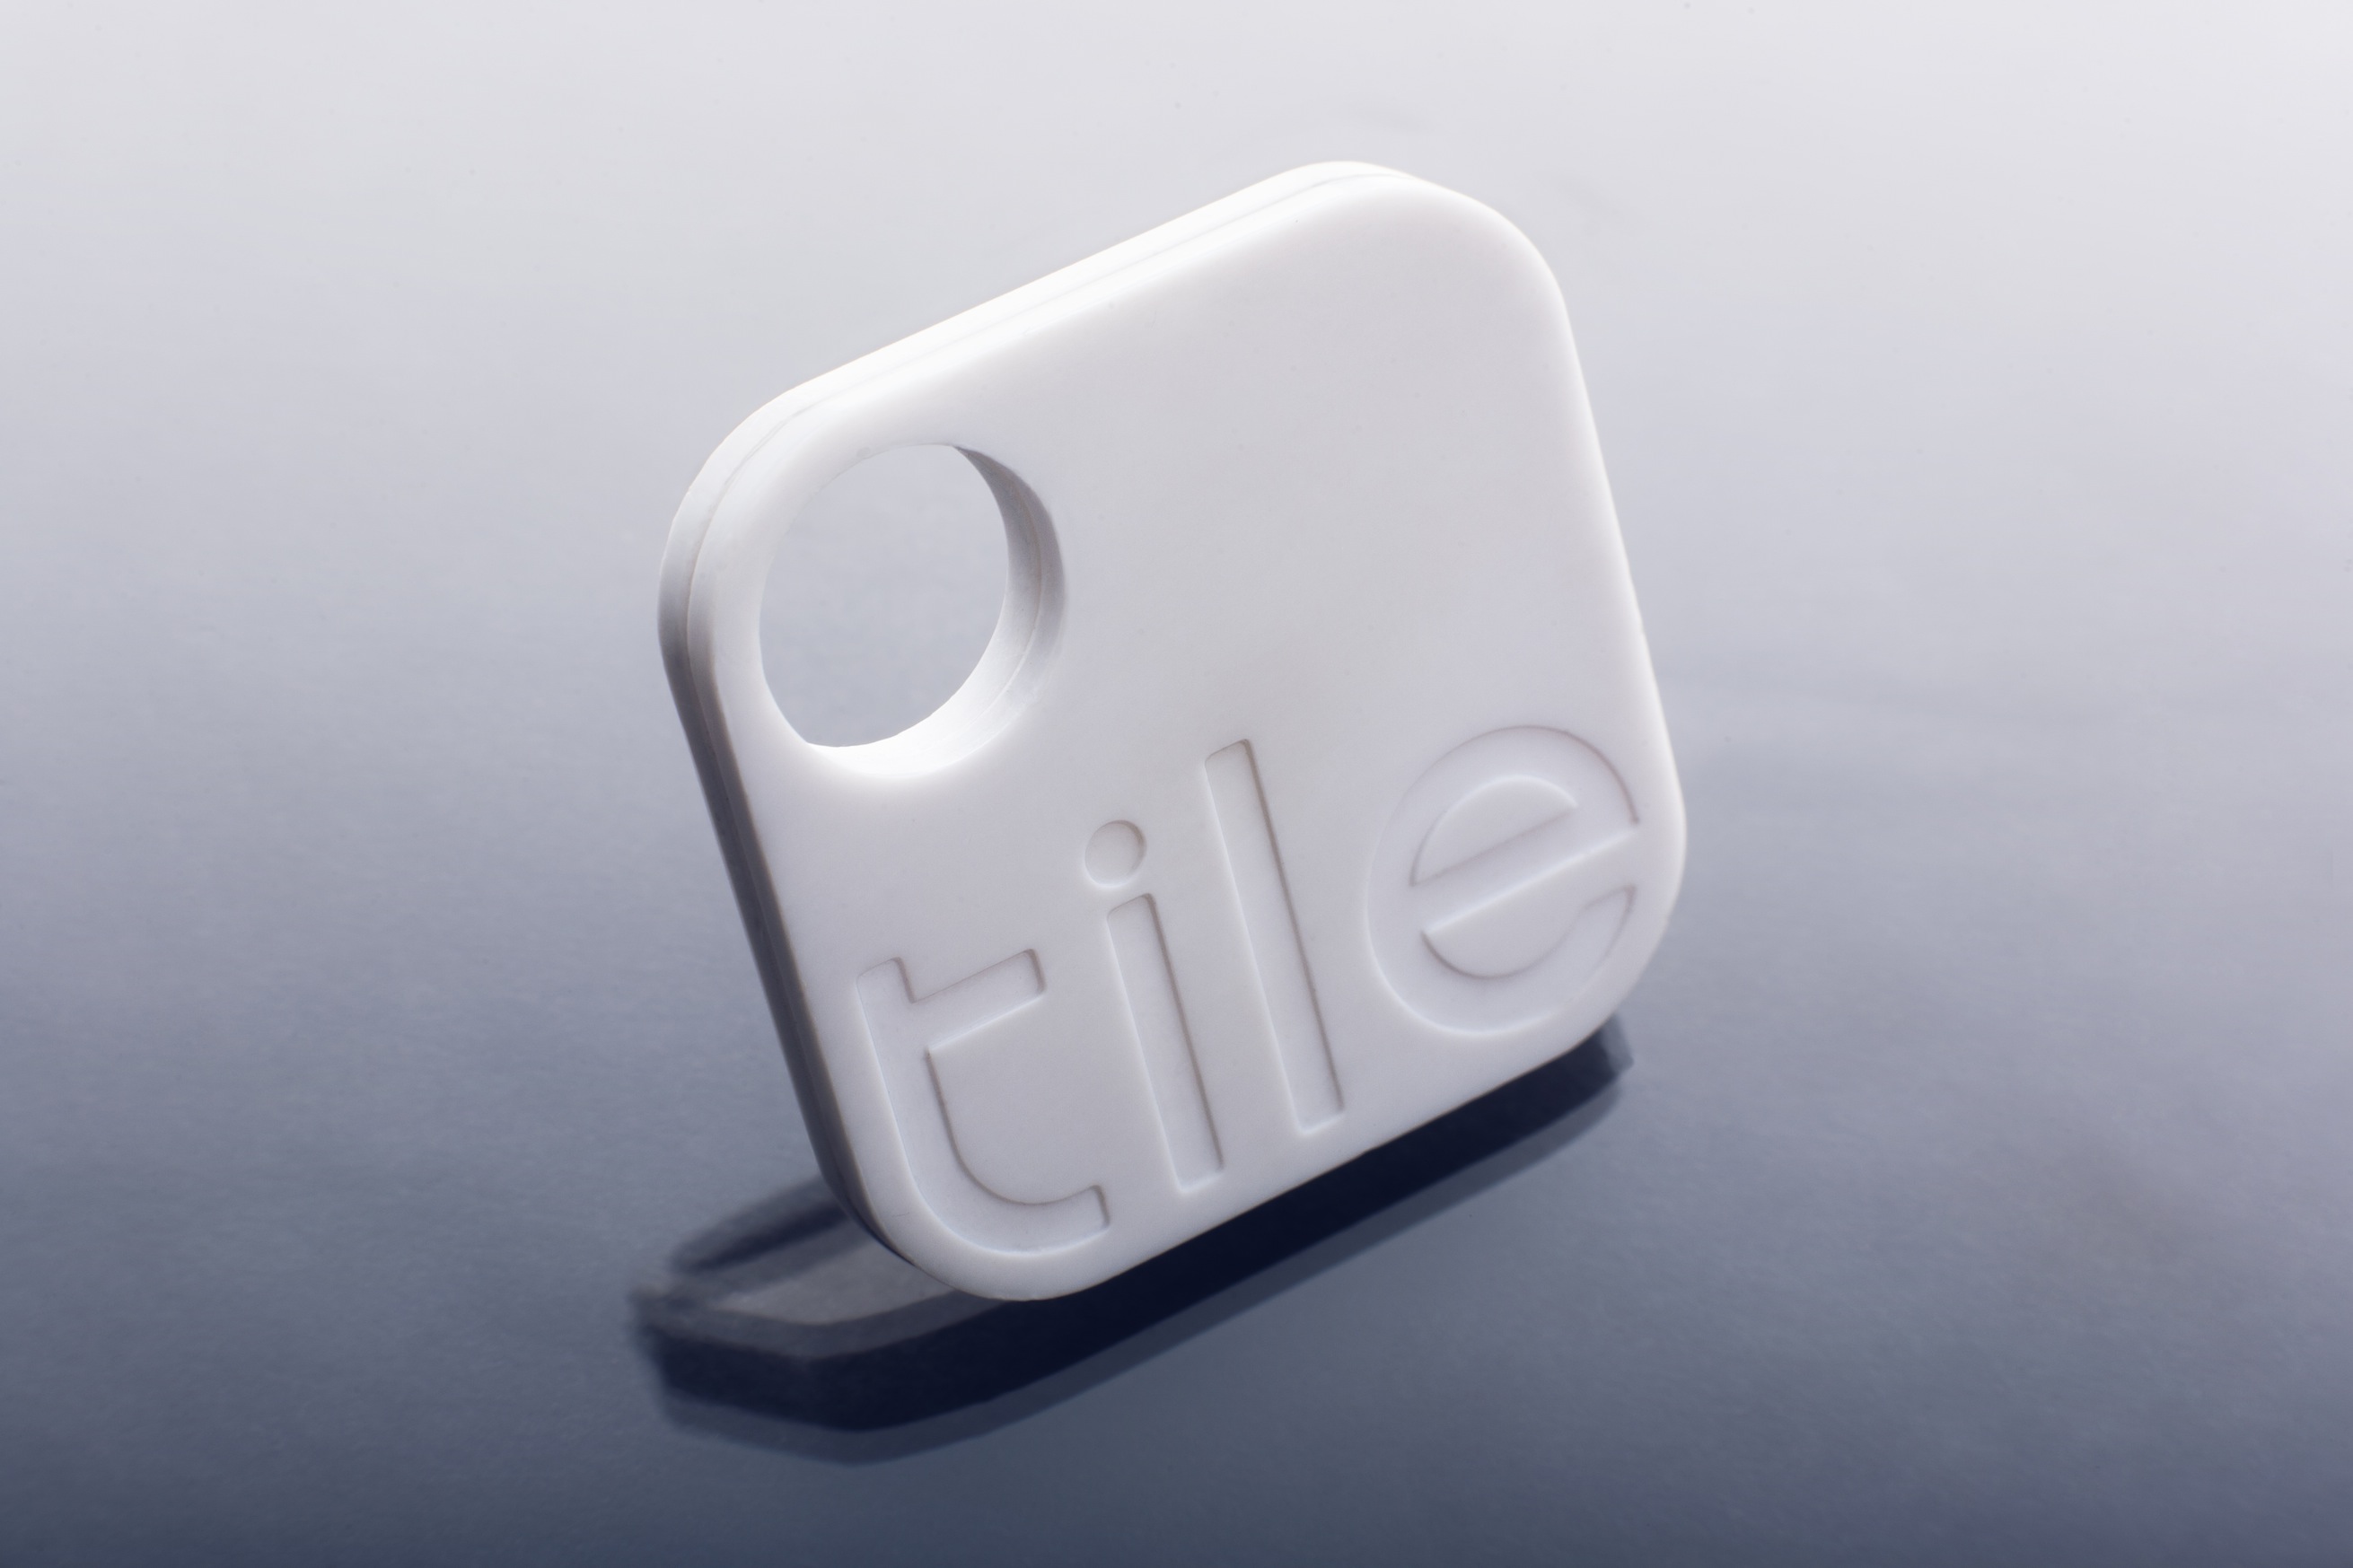 Tile Track And Find Lost Items Via Crowd Sourced Iphone App 9to5mac